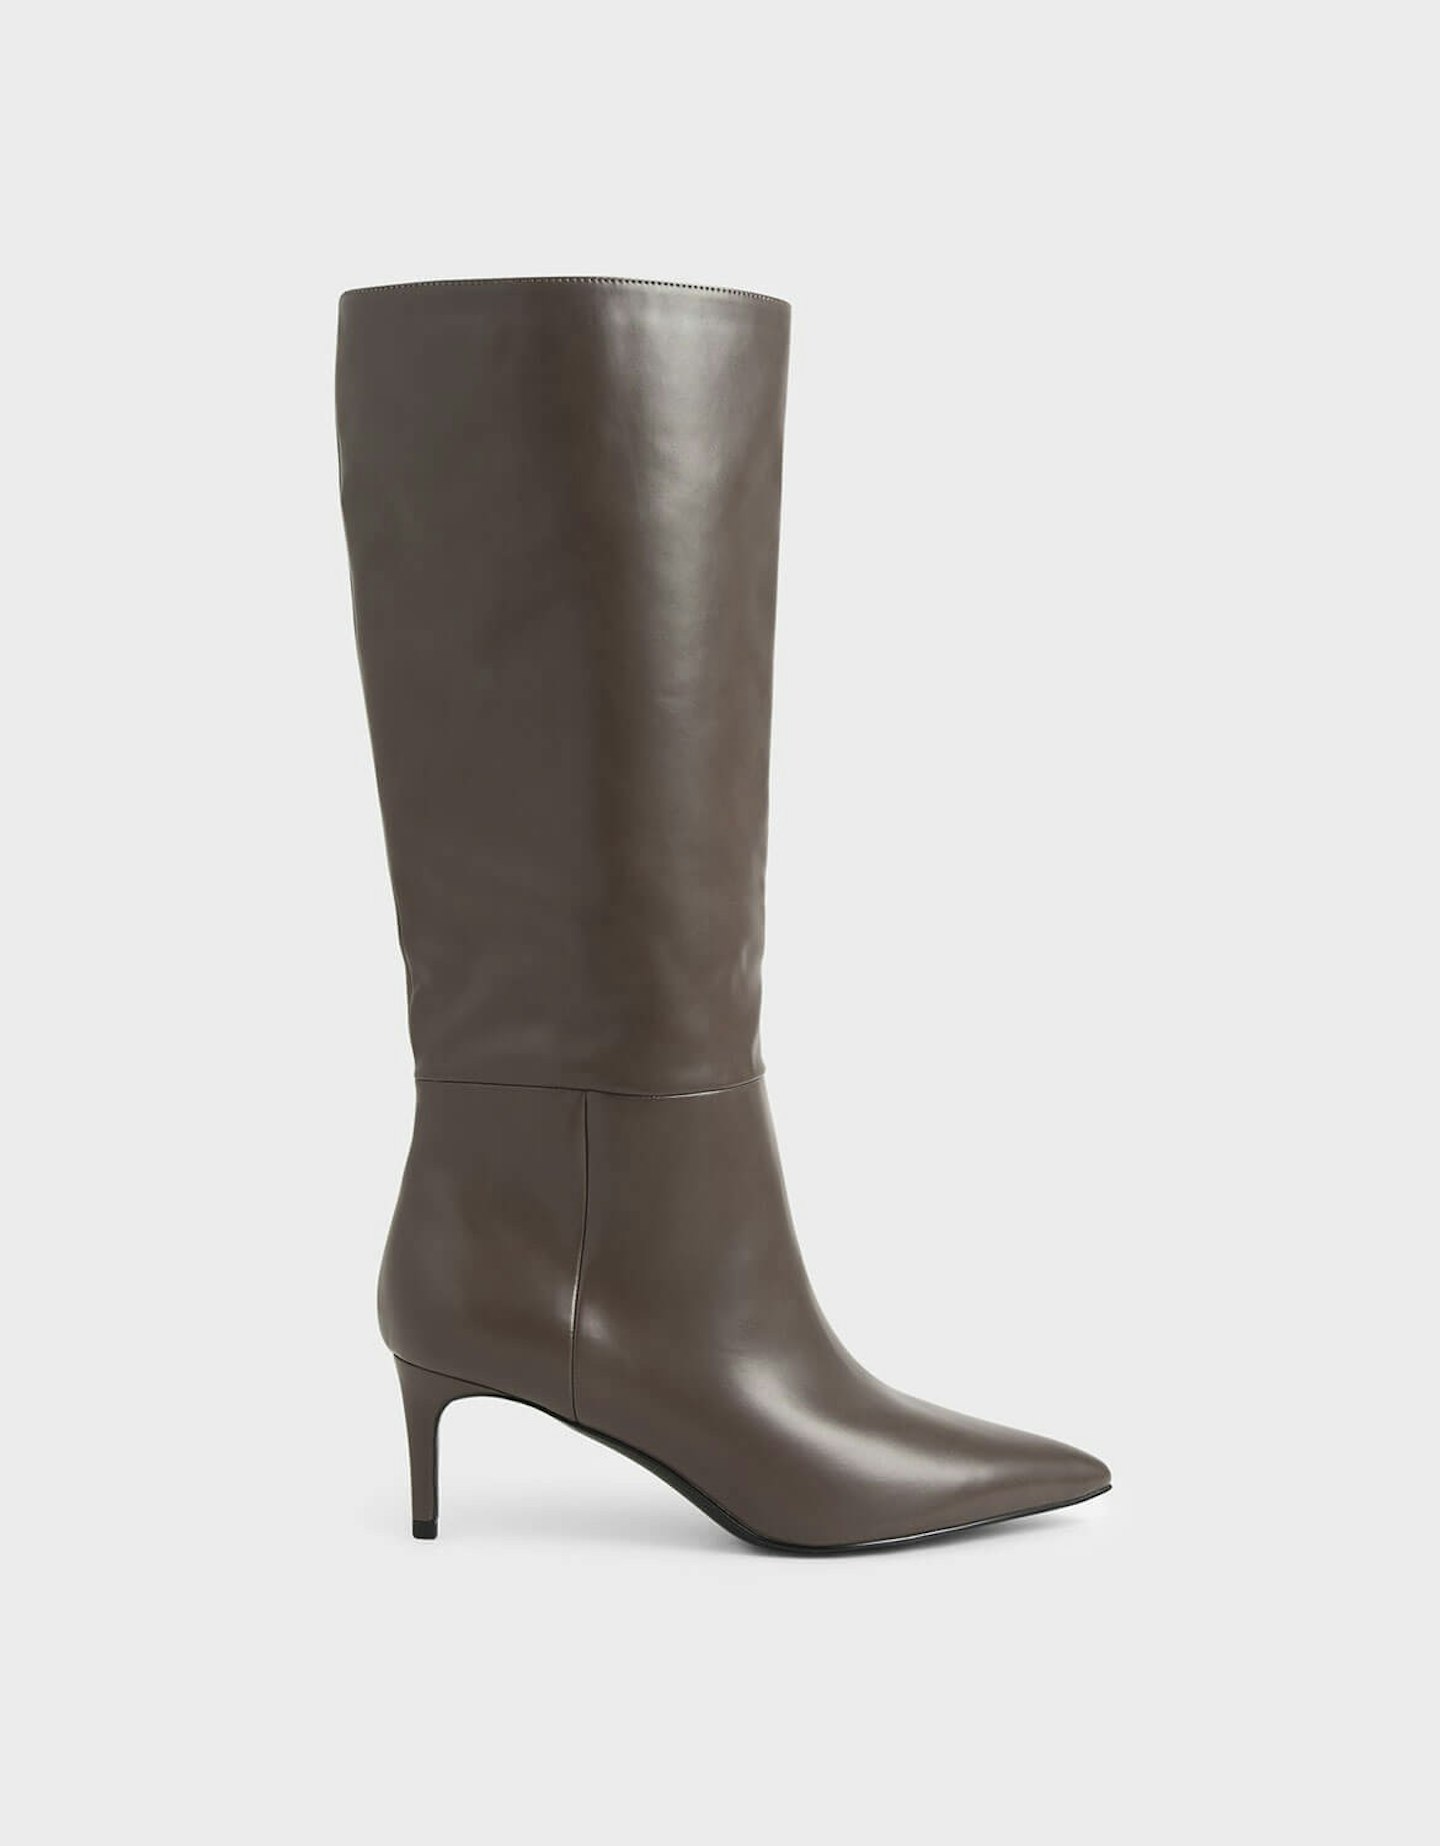 Charles & Keith, Knee High Boots, £69